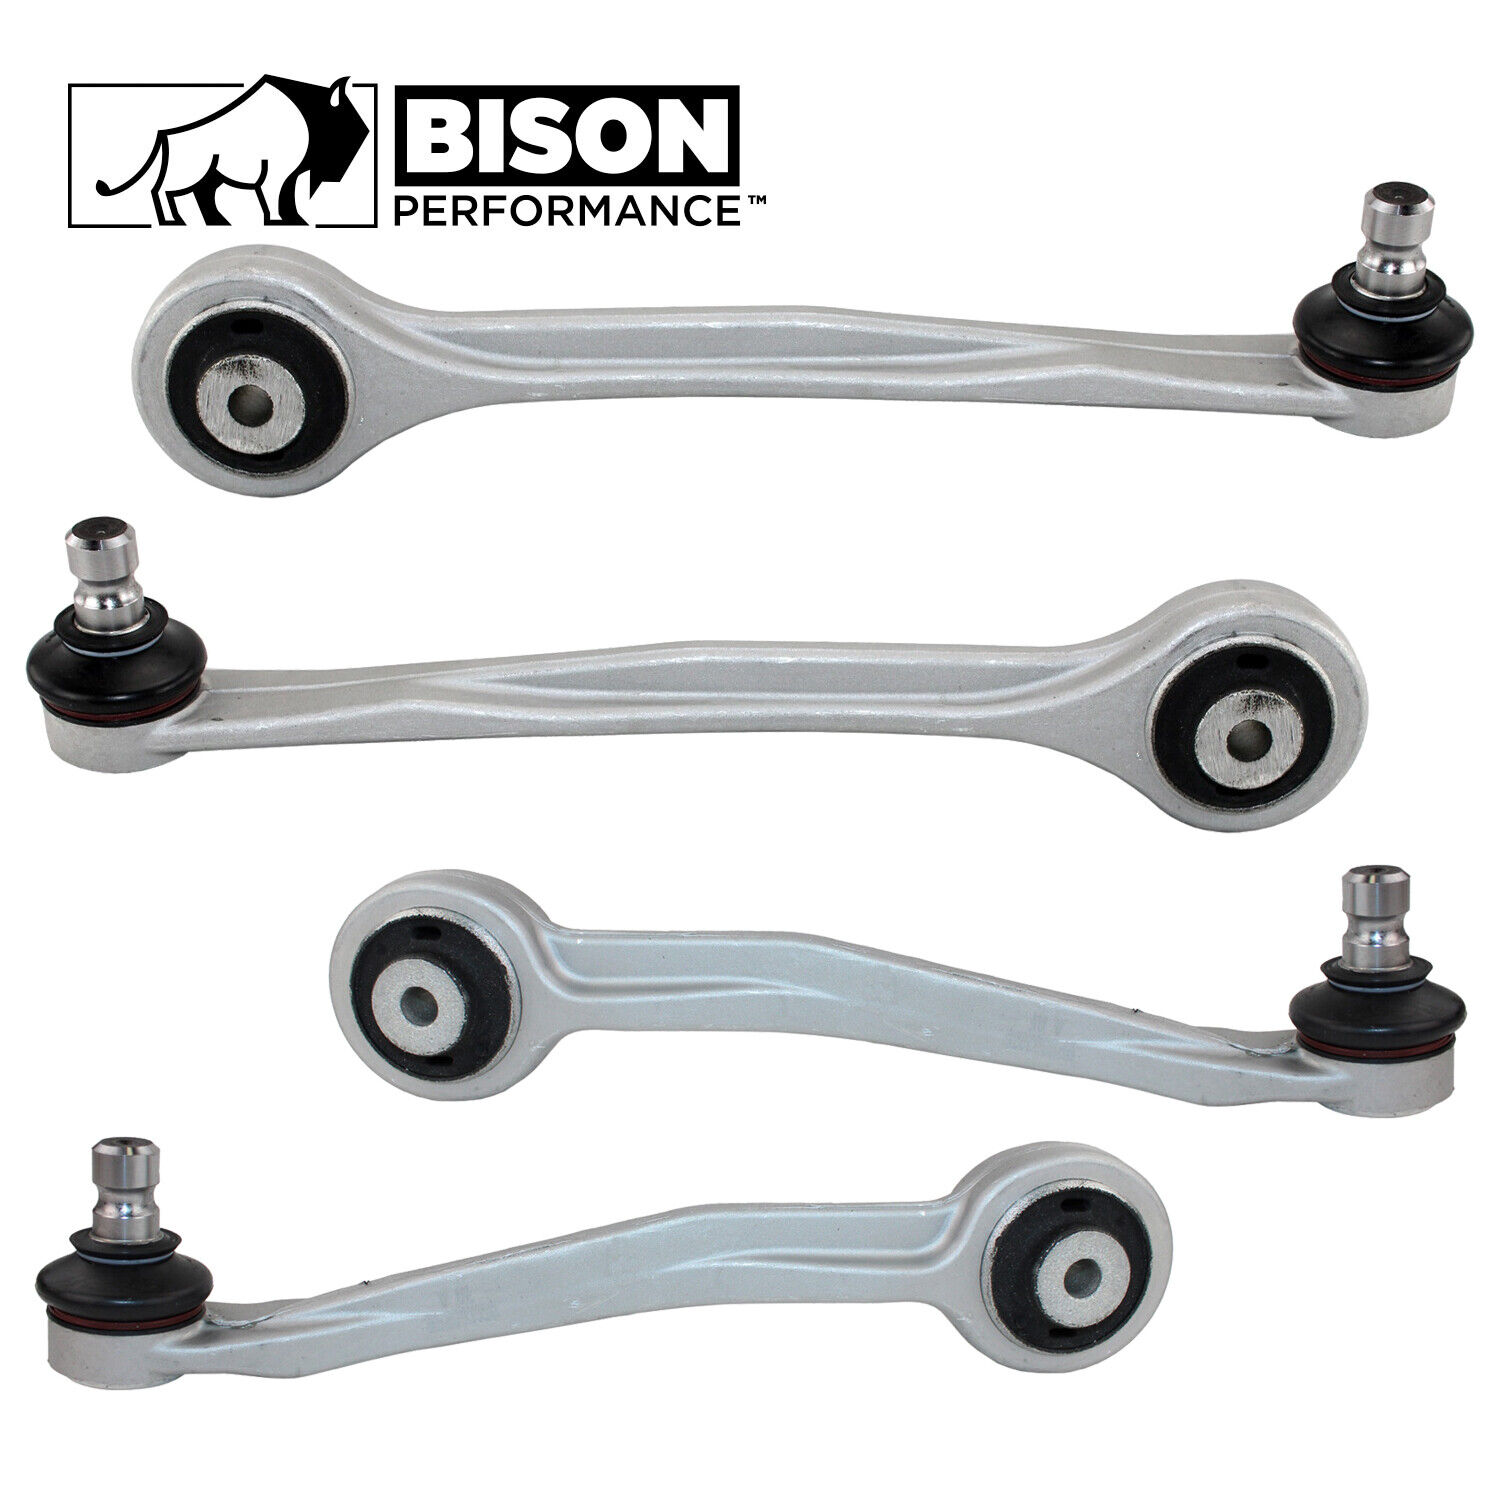 Bison Performance 4pc Front Upper Control Arms Kit For Audi A4 A5 Q5 S4 S5 SQ5